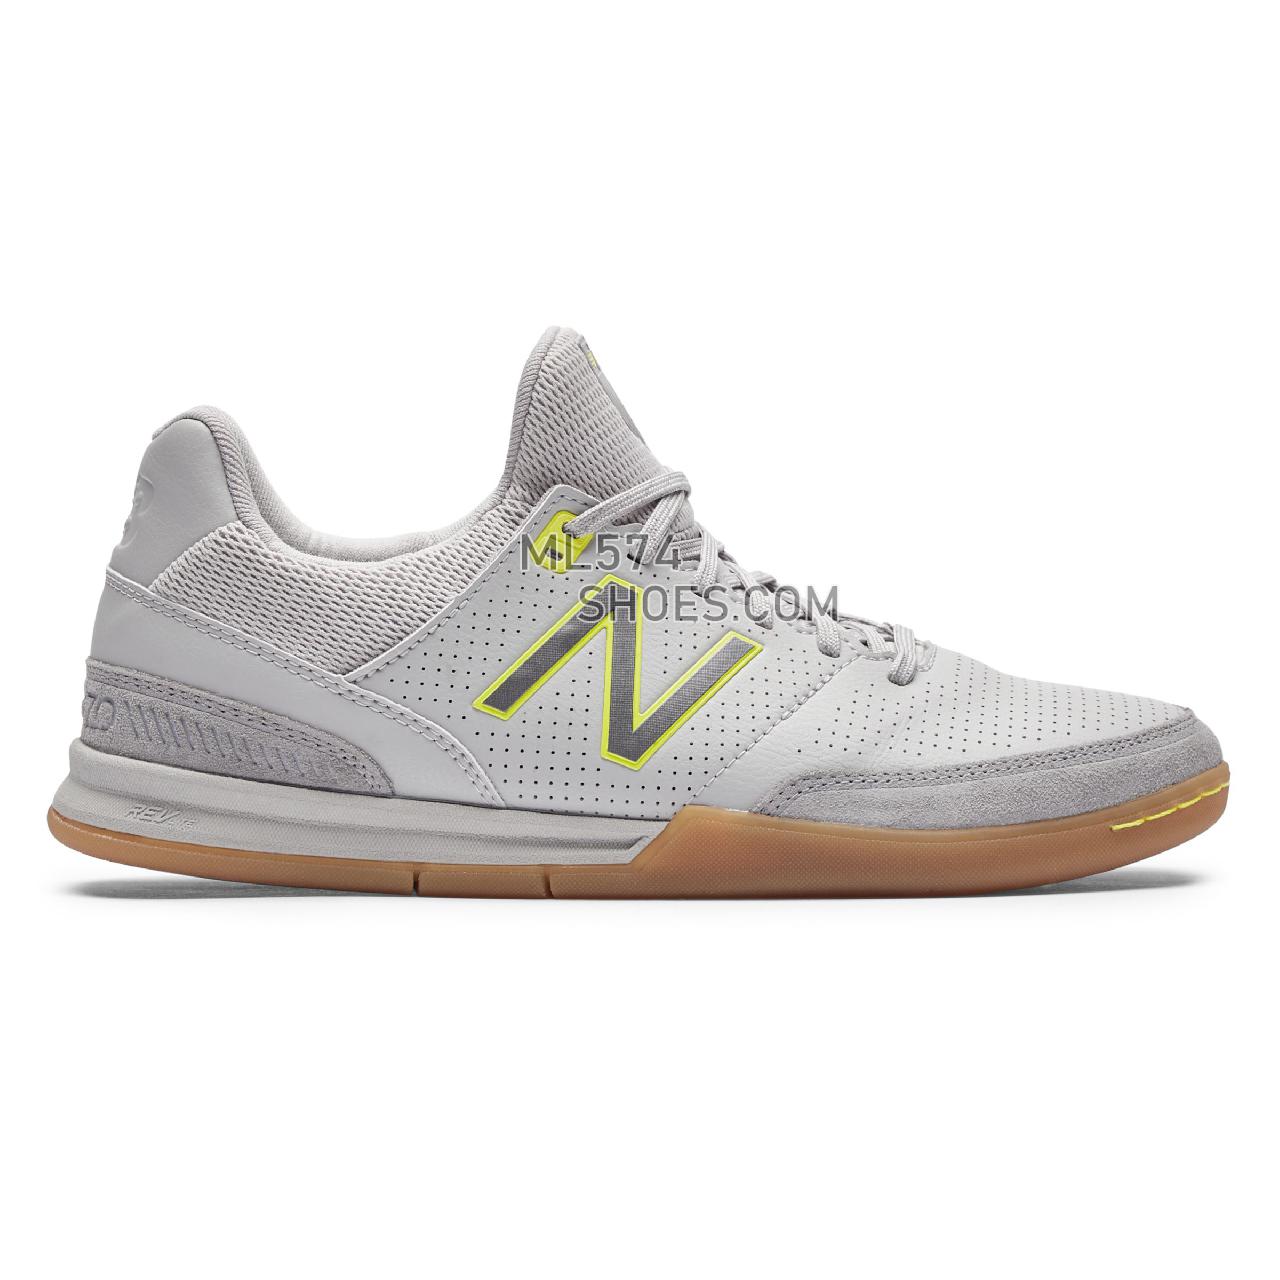 New Balance Audazo v4 Pro IN - Men's Audazo v4 Pro IN - Rain Cloud with Sulphur - MSAPIRS4